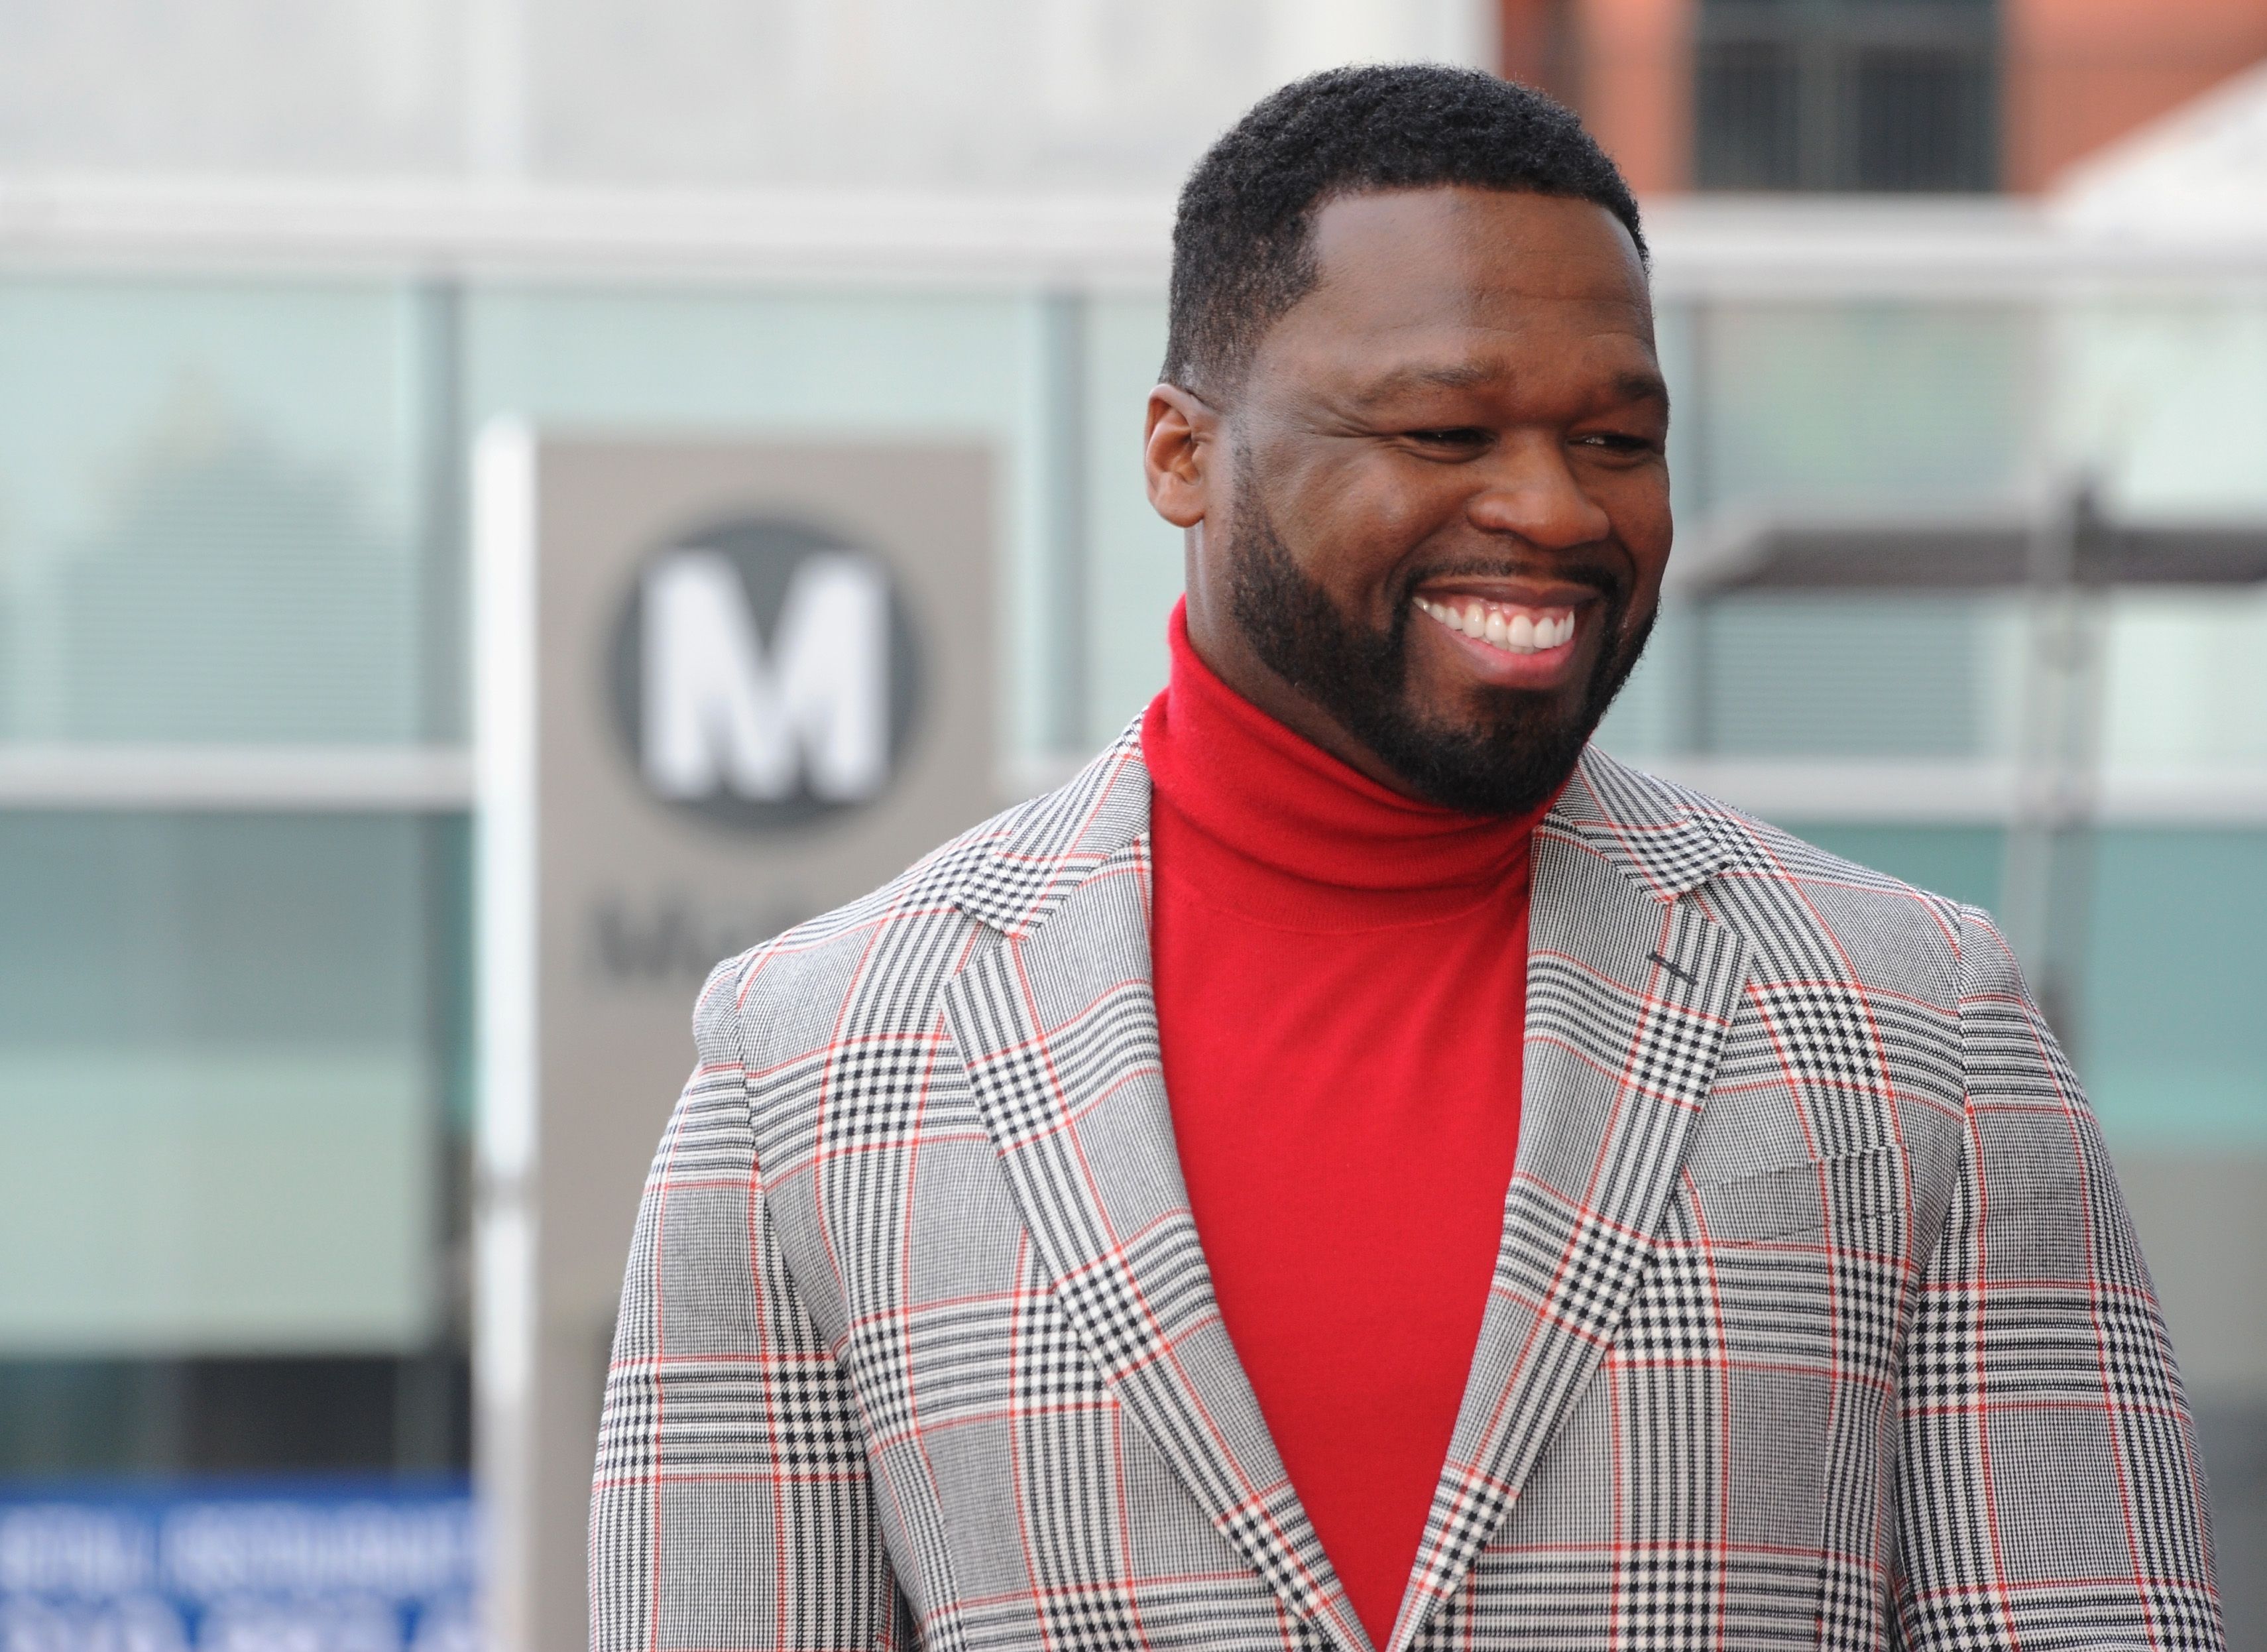 Curtis "50 Cent" Jackson attends a ceremony honoring him with a star on the Hollywood Walk of Fame on January 30, 2020 in Hollywood, California. | Source: Getty Images